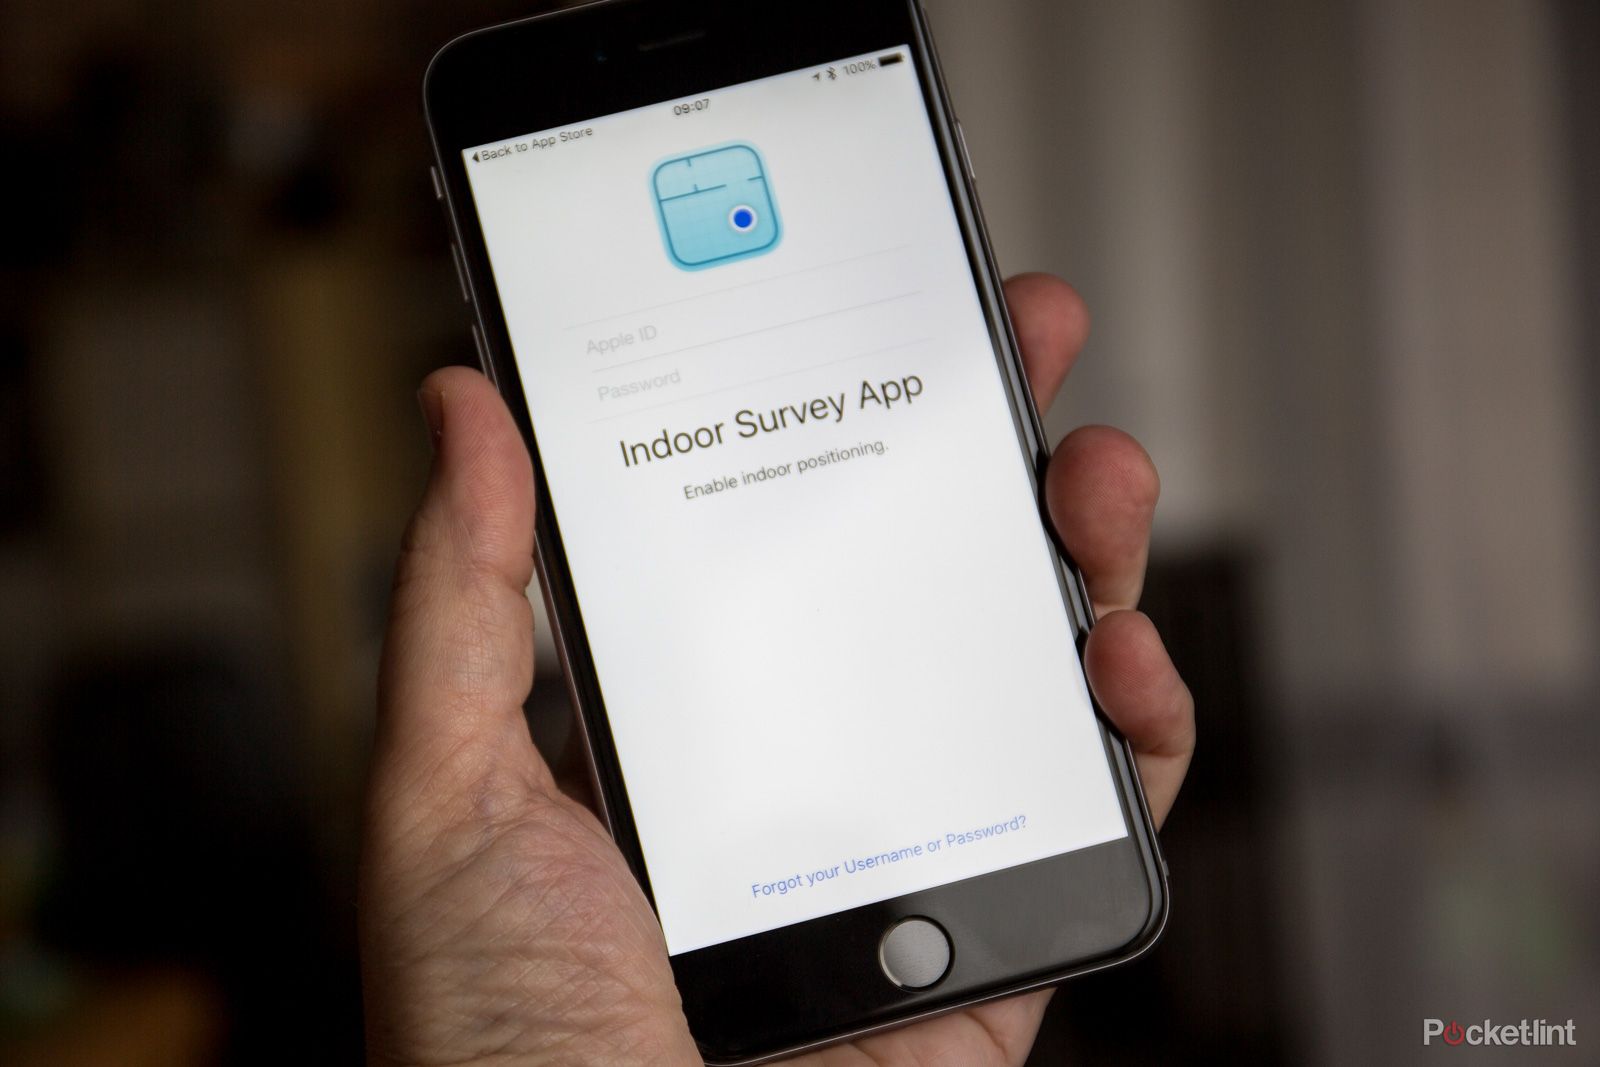 apple may have cracked indoor gps revealed on indoor survey app image 1